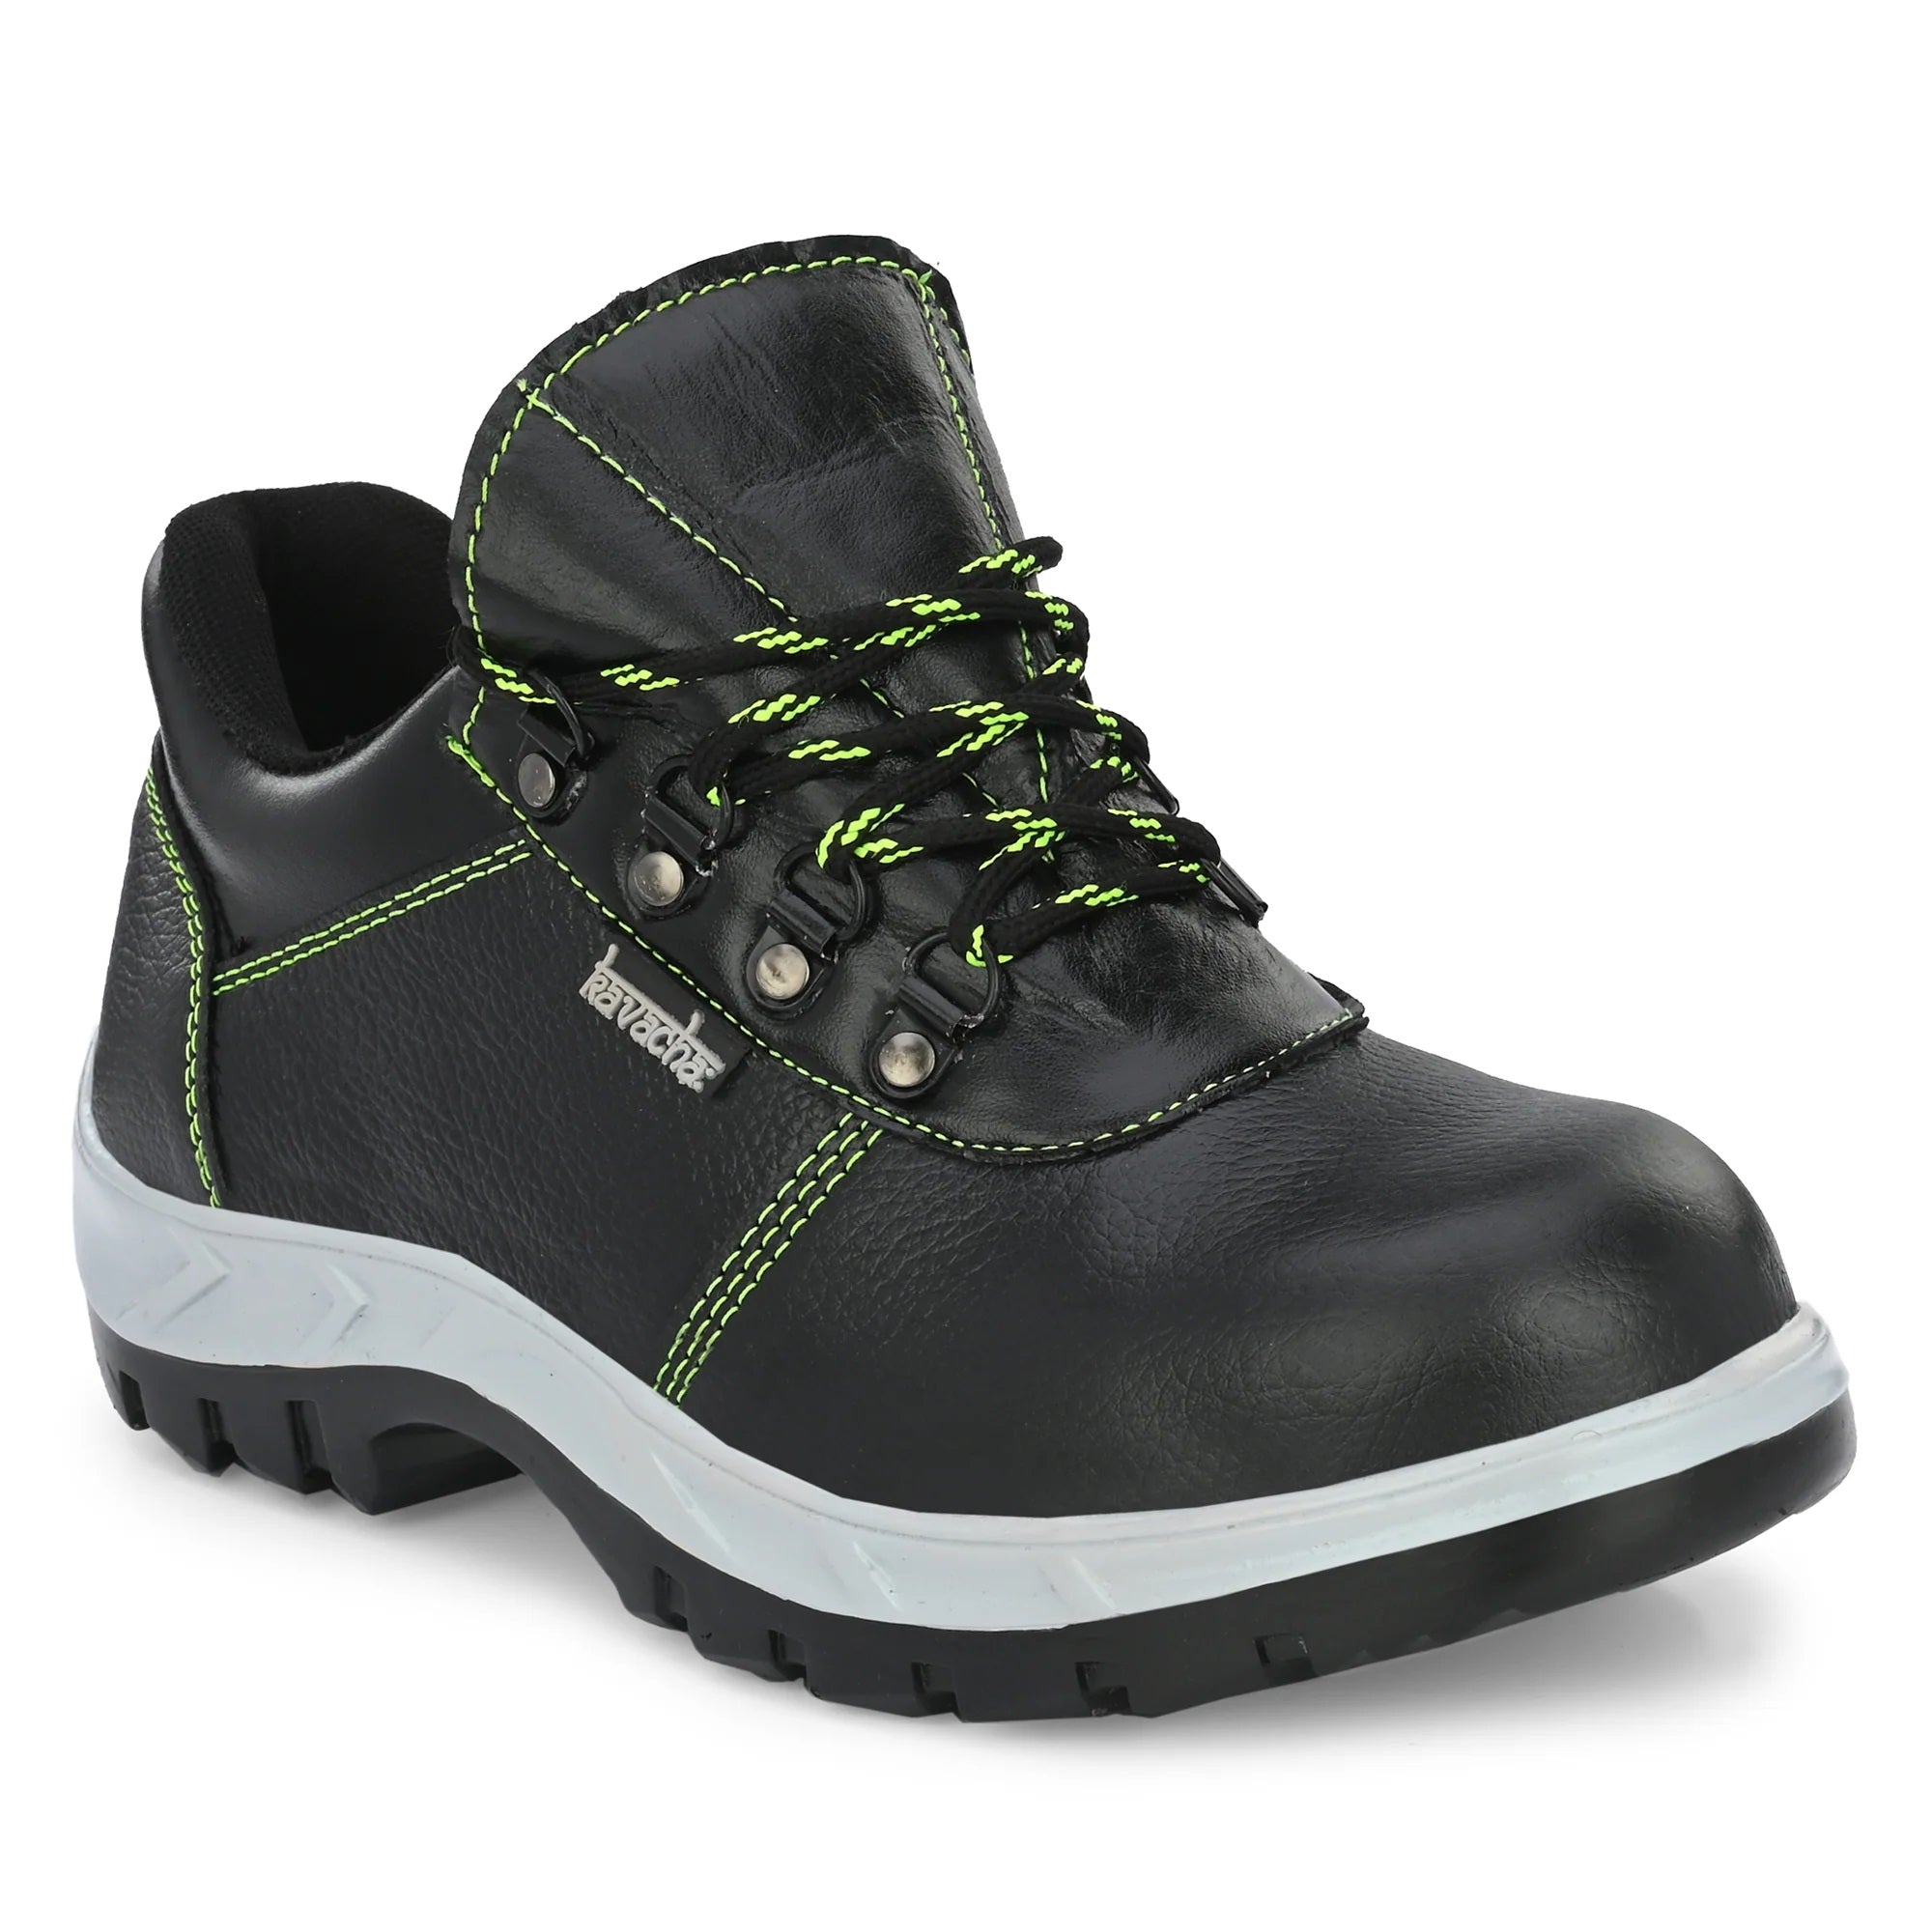 Kavacha Pure Leather Steel Toe Safety Shoe S130